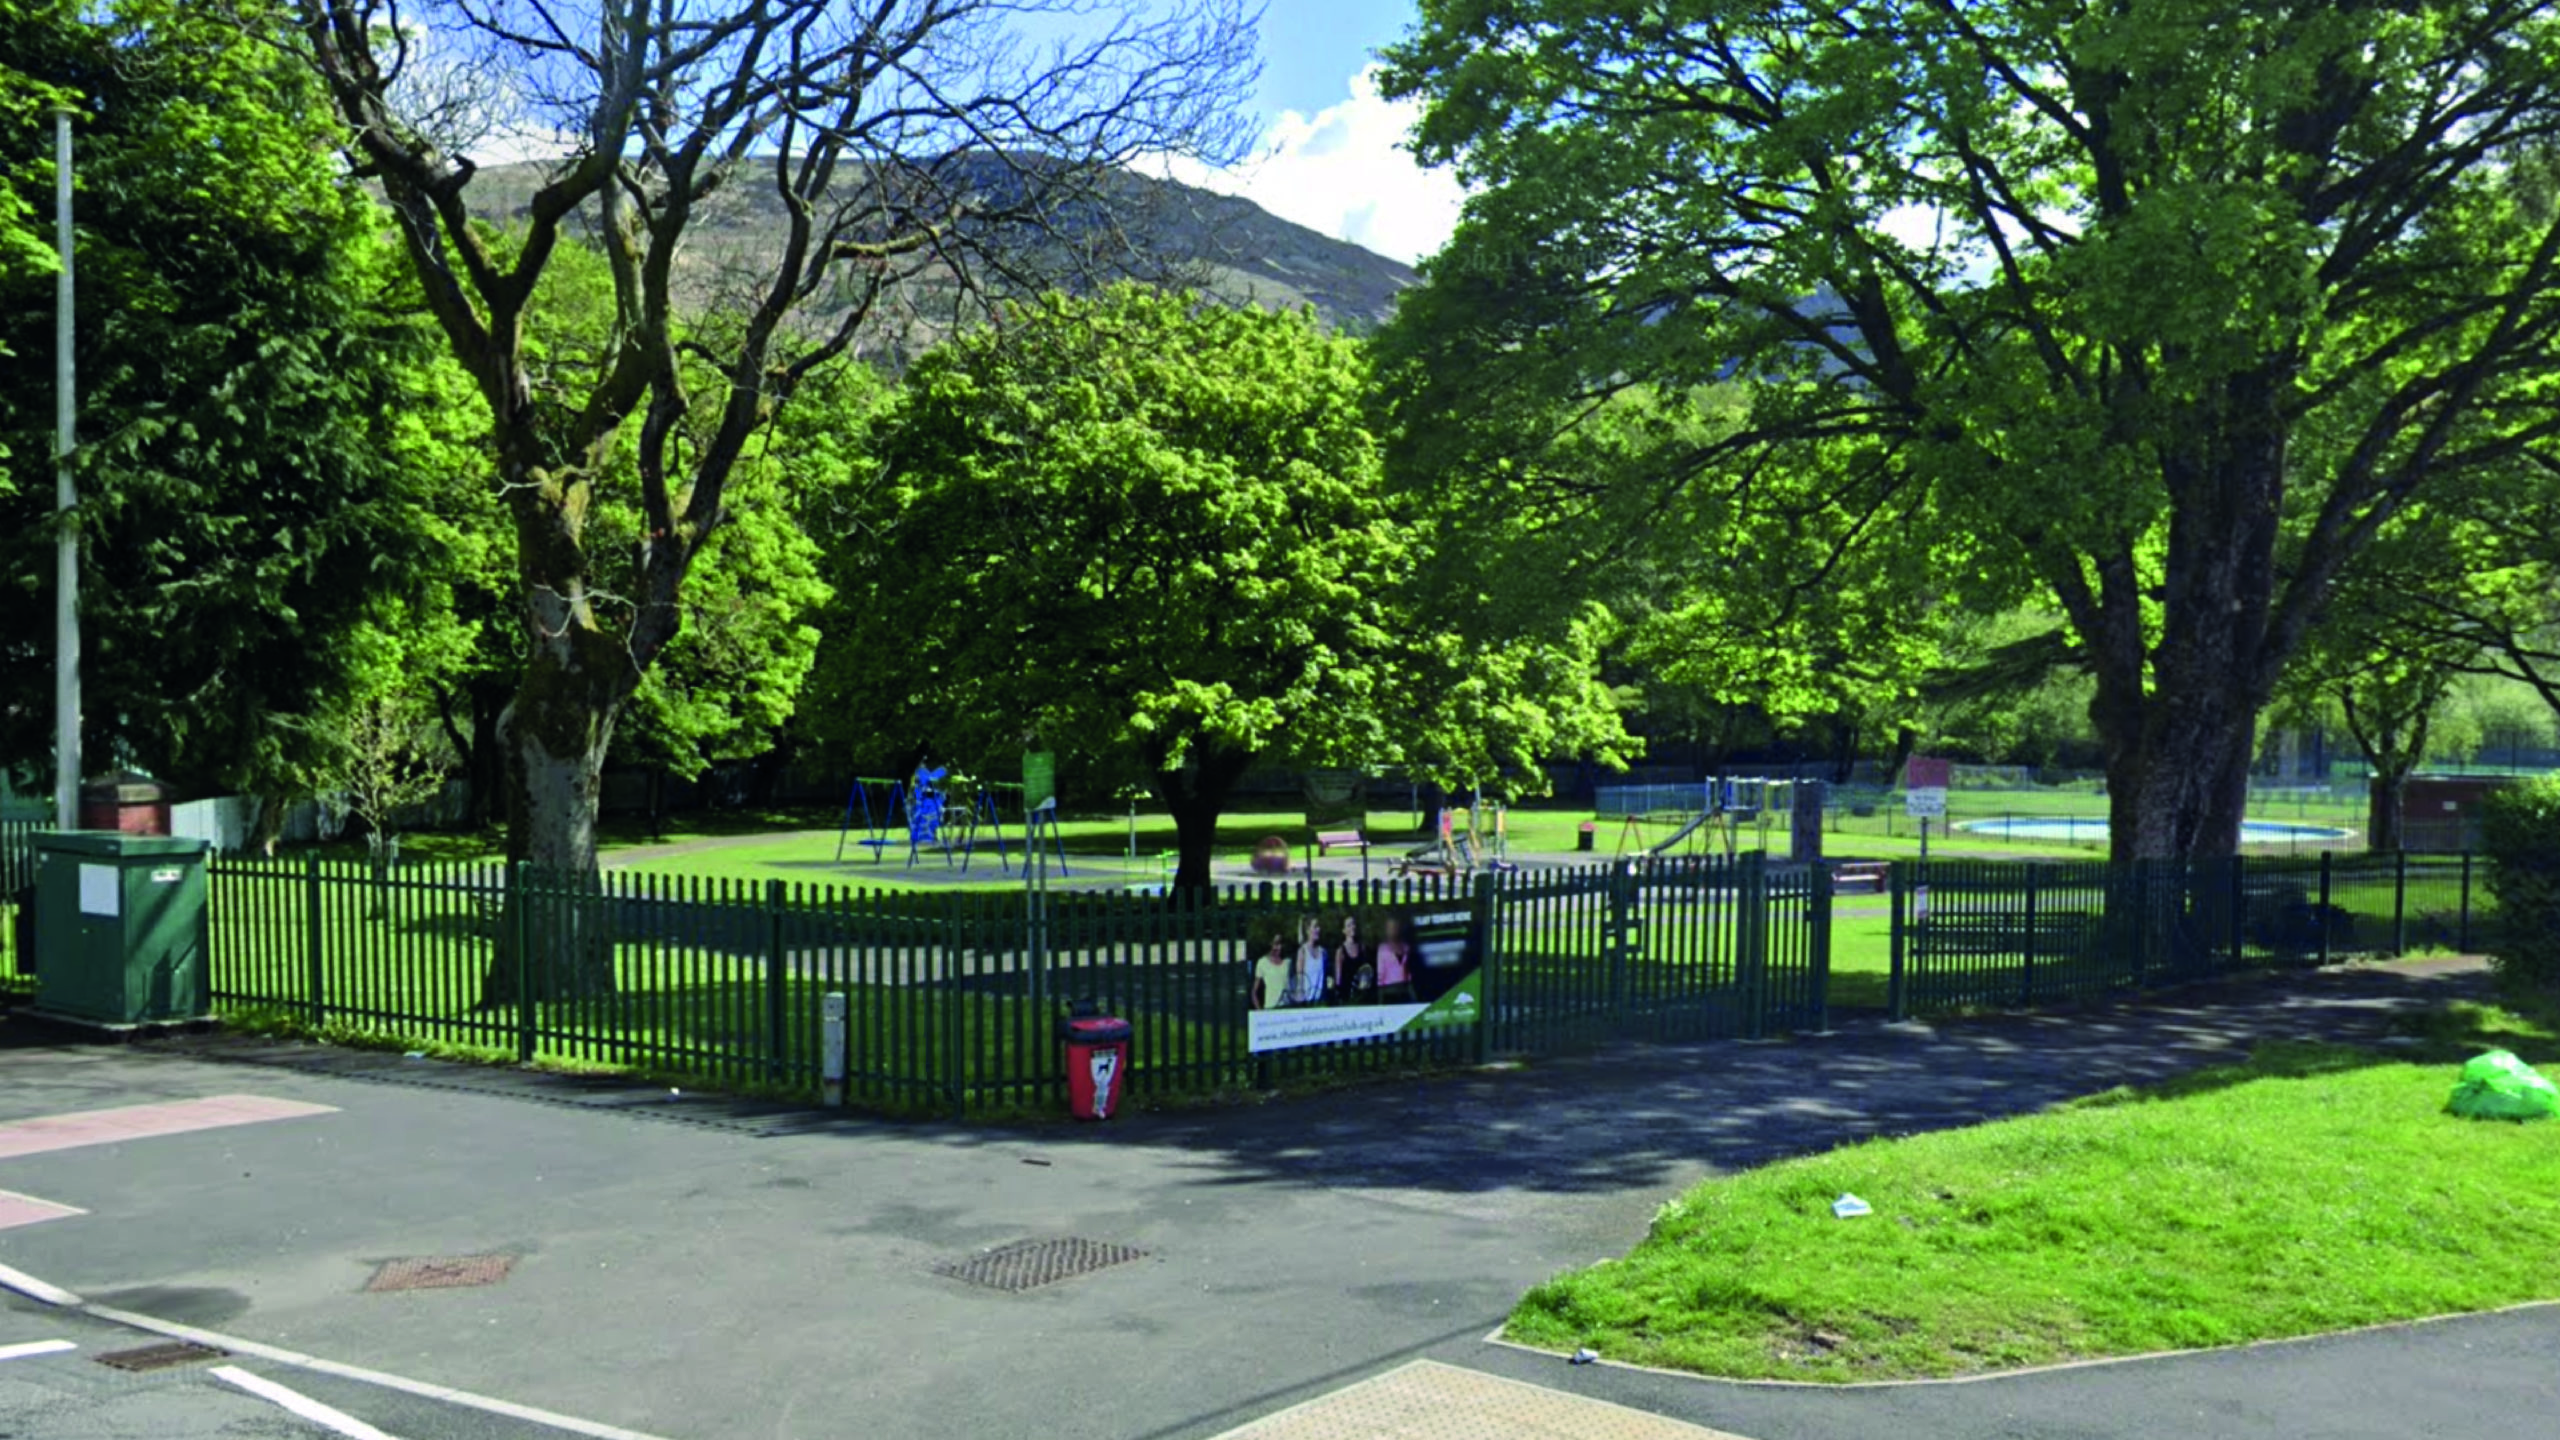 Treorchy Park